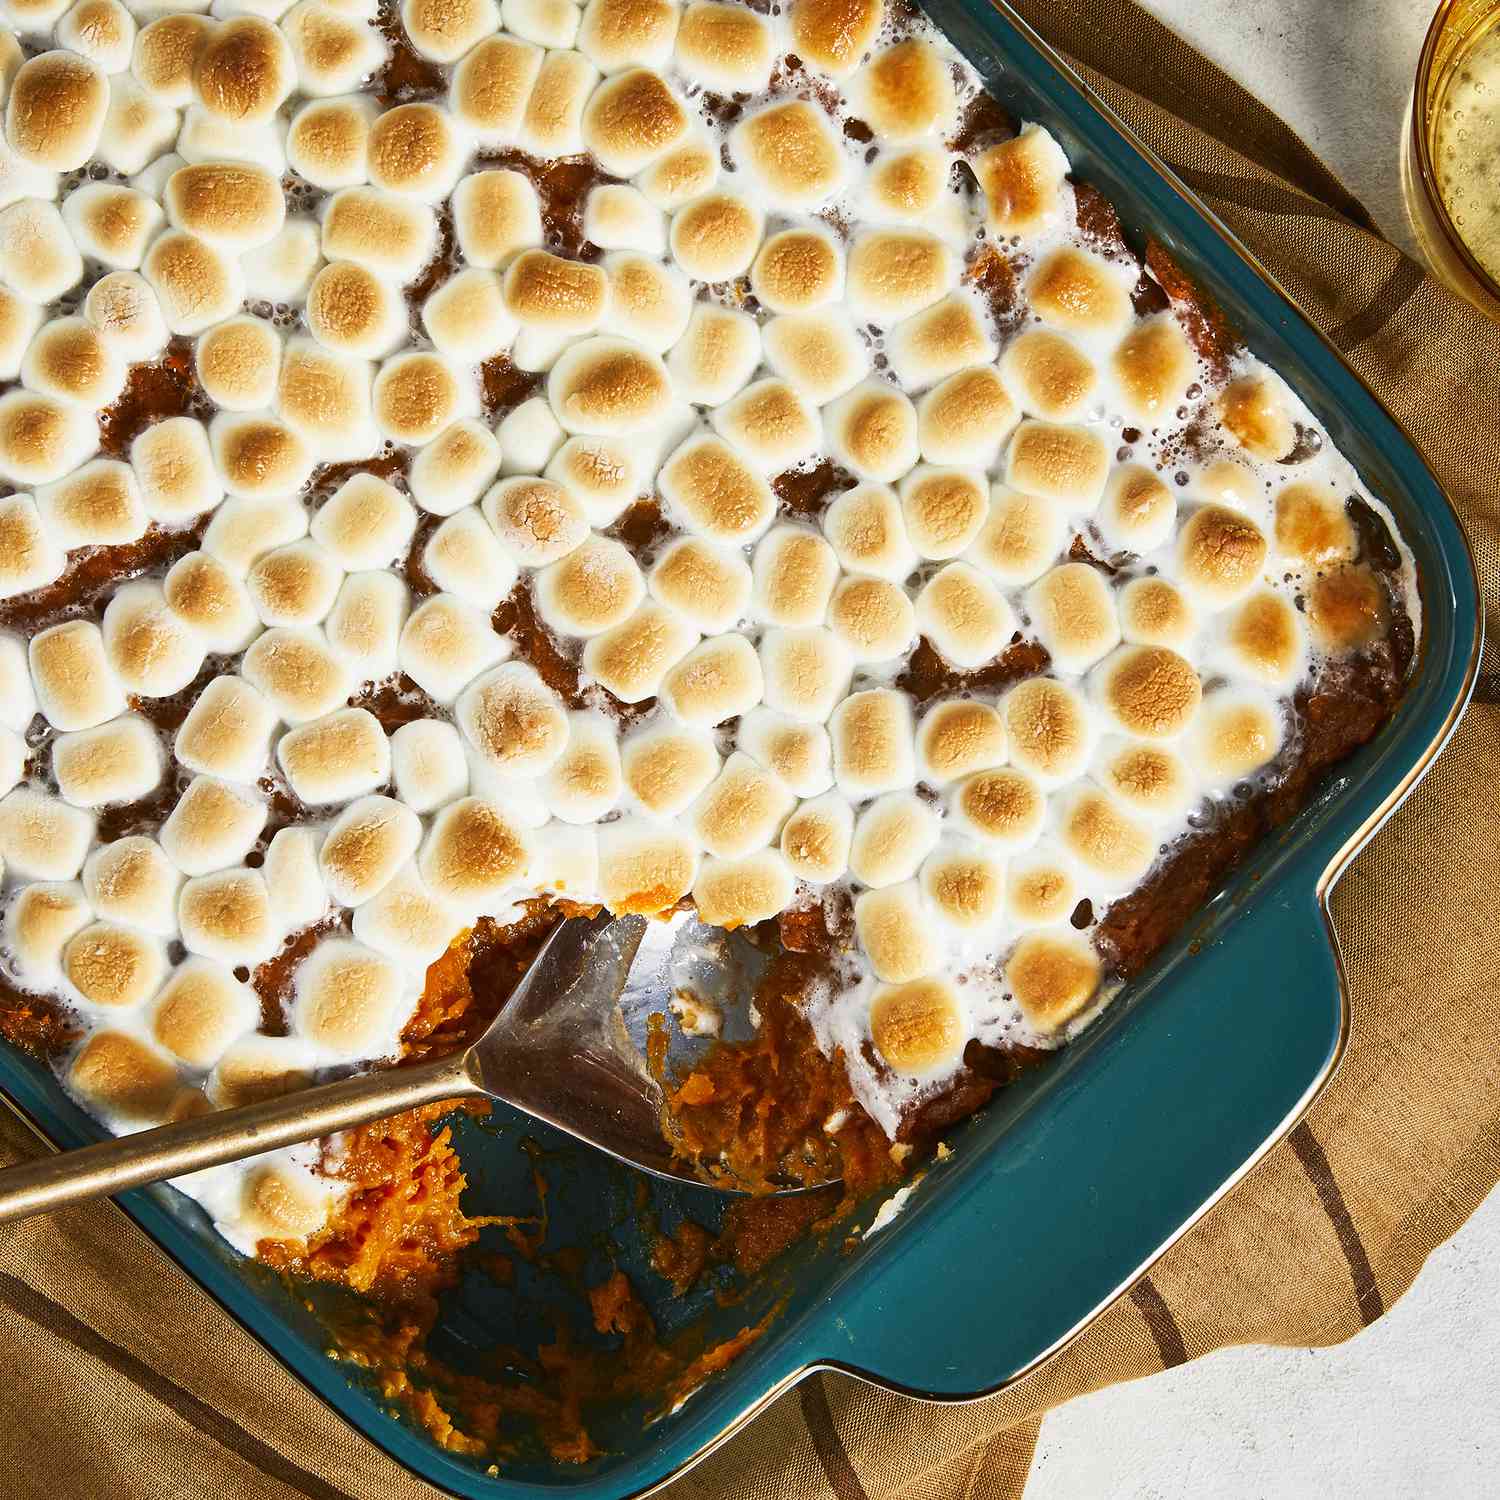 an overhead view looking into a candied sweet potato casserole topped with golden-brown marshmallows. a scoop has already been taken out.